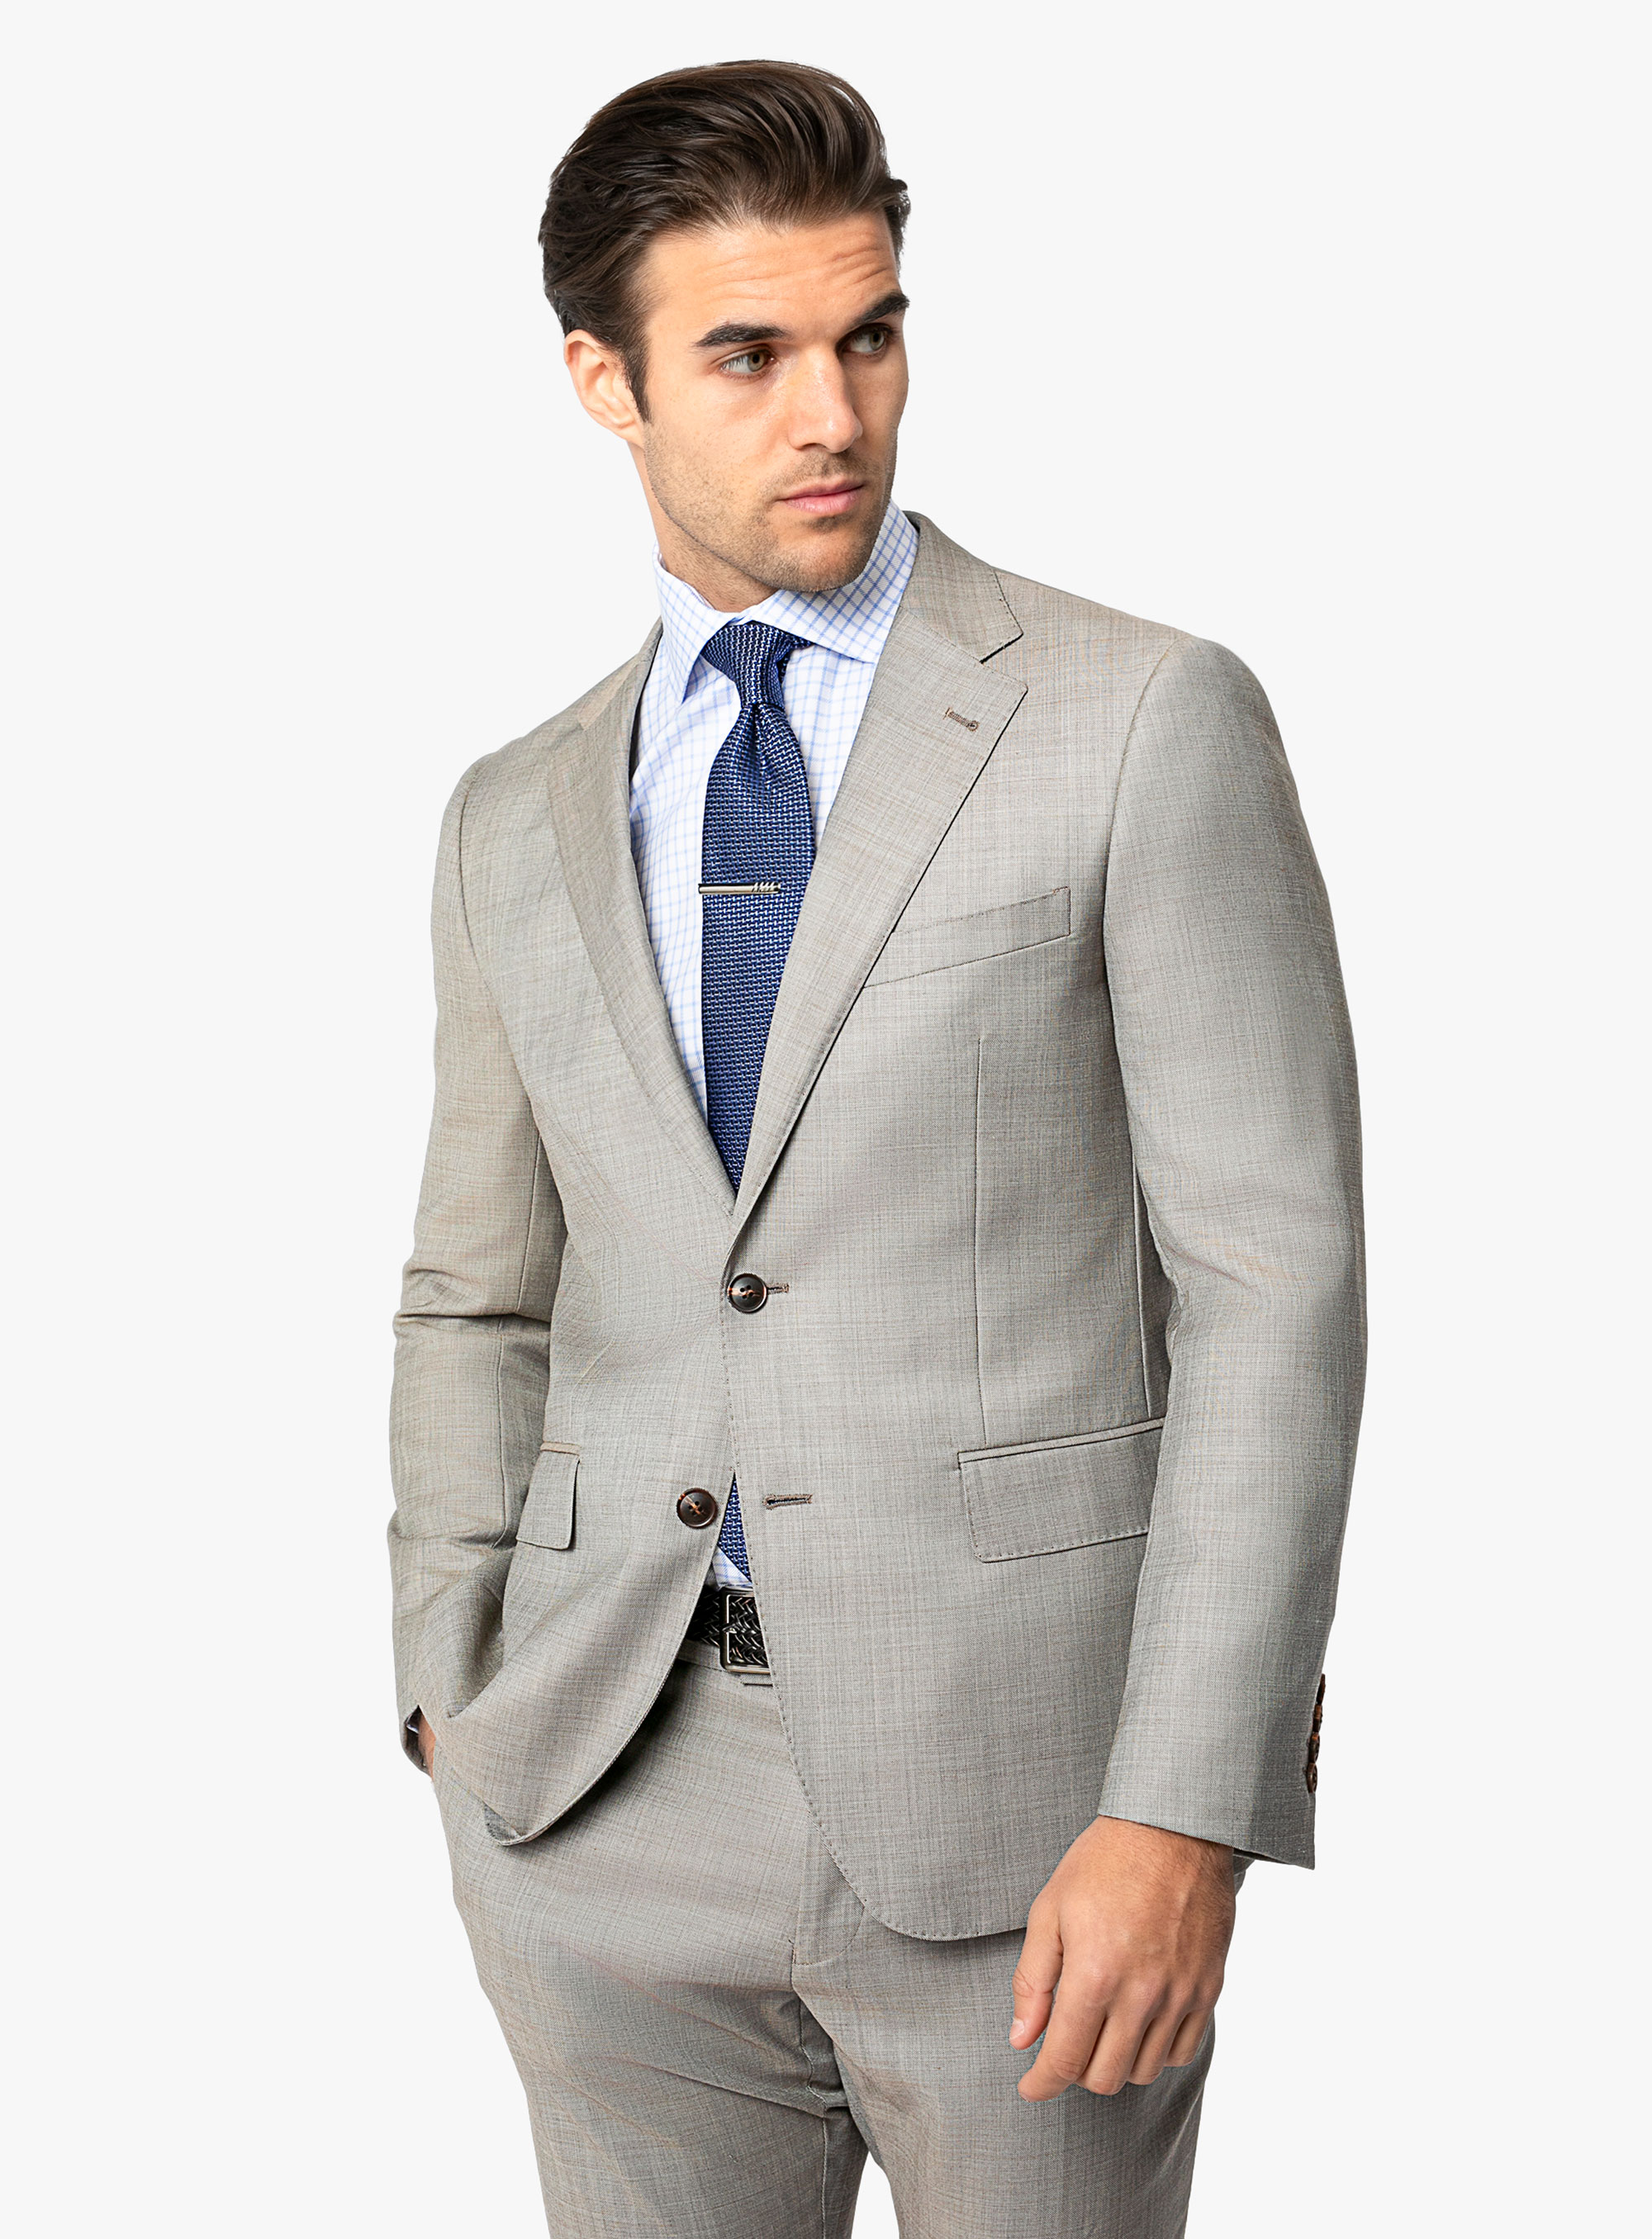 $22,000 | Expensive suits, Zegna suit, Well dressed men